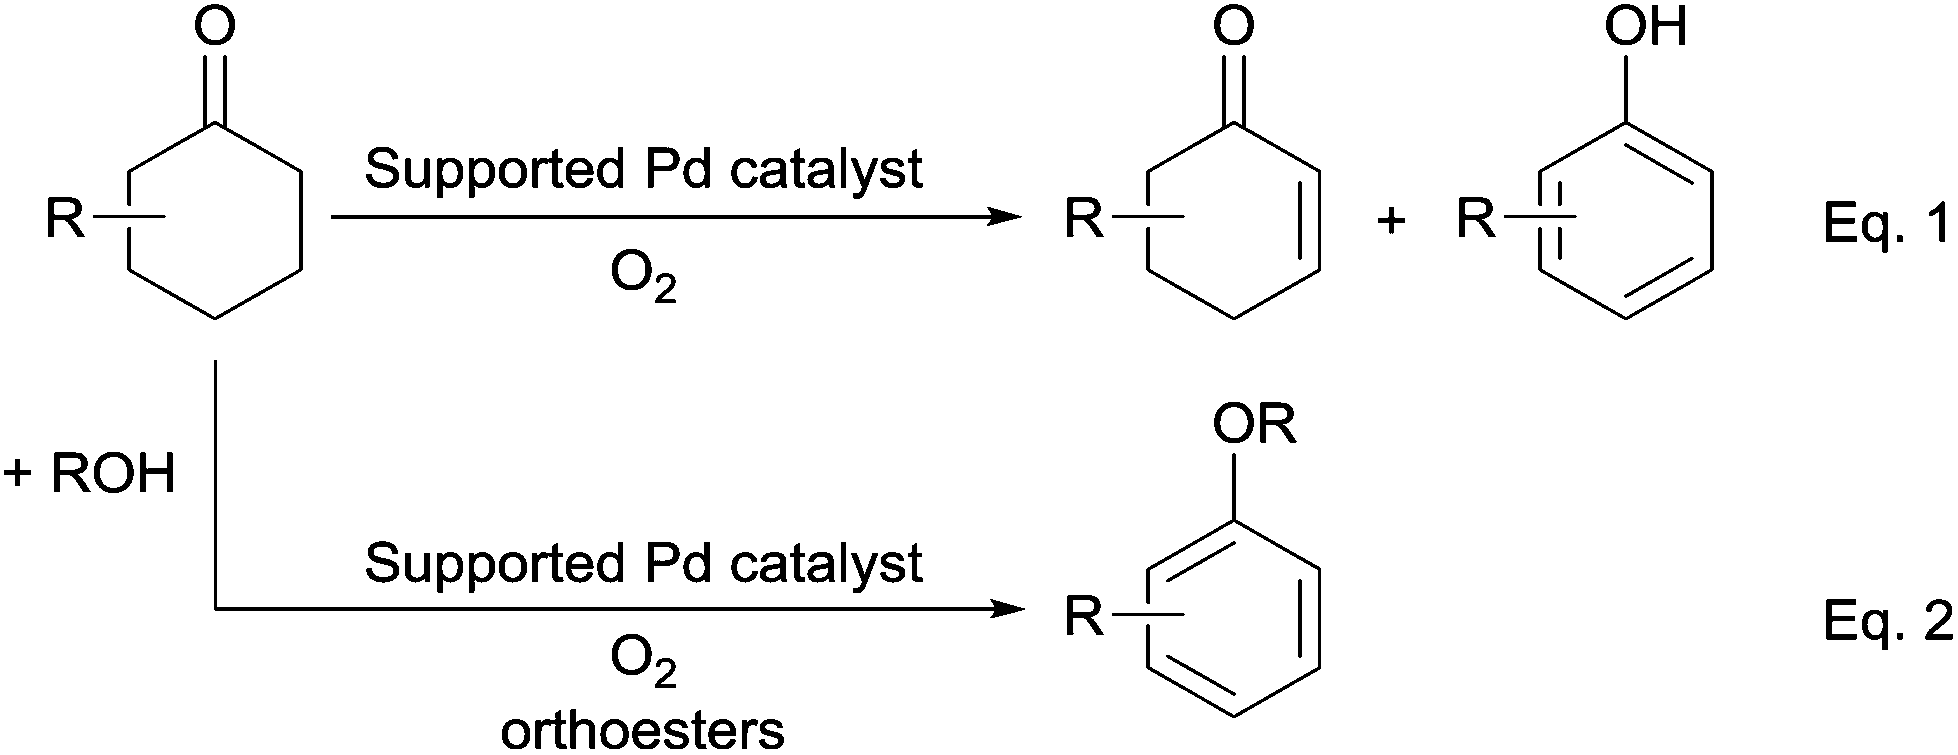 aerobic oxidation of cyclohexanones to phenols and aryl ethers